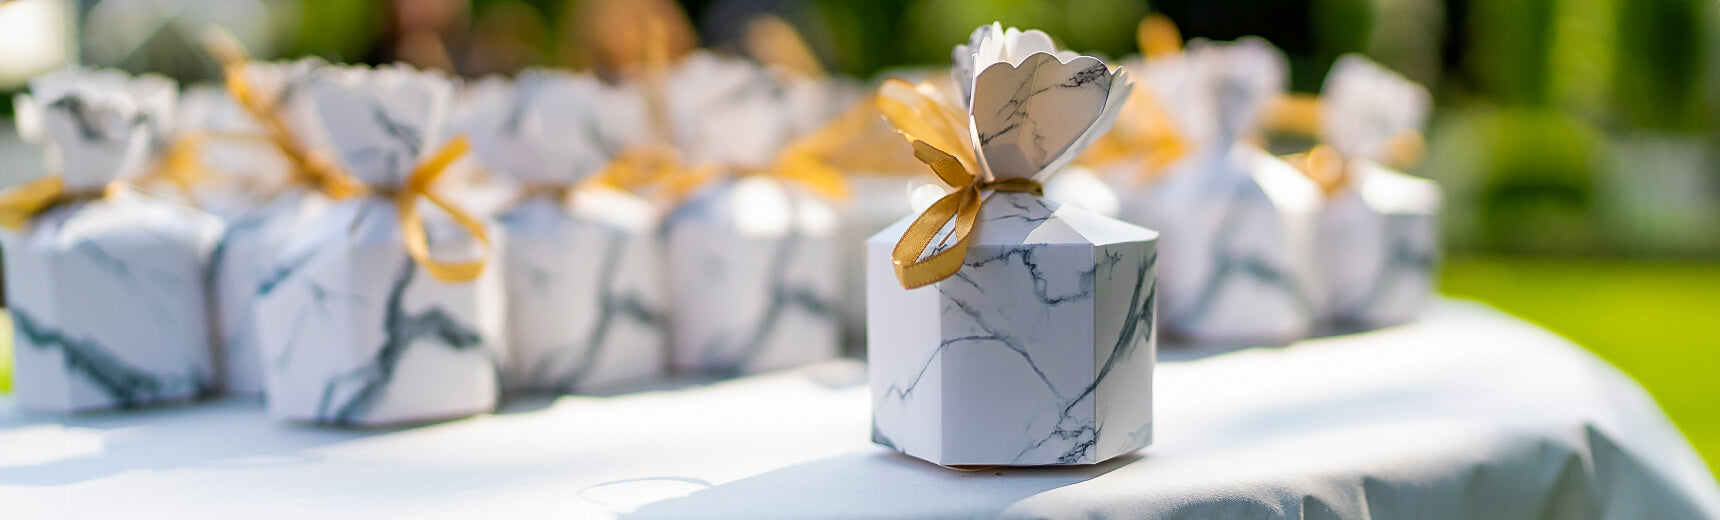 Unique & Thoughtful Wedding Return Gifts Ideas Online